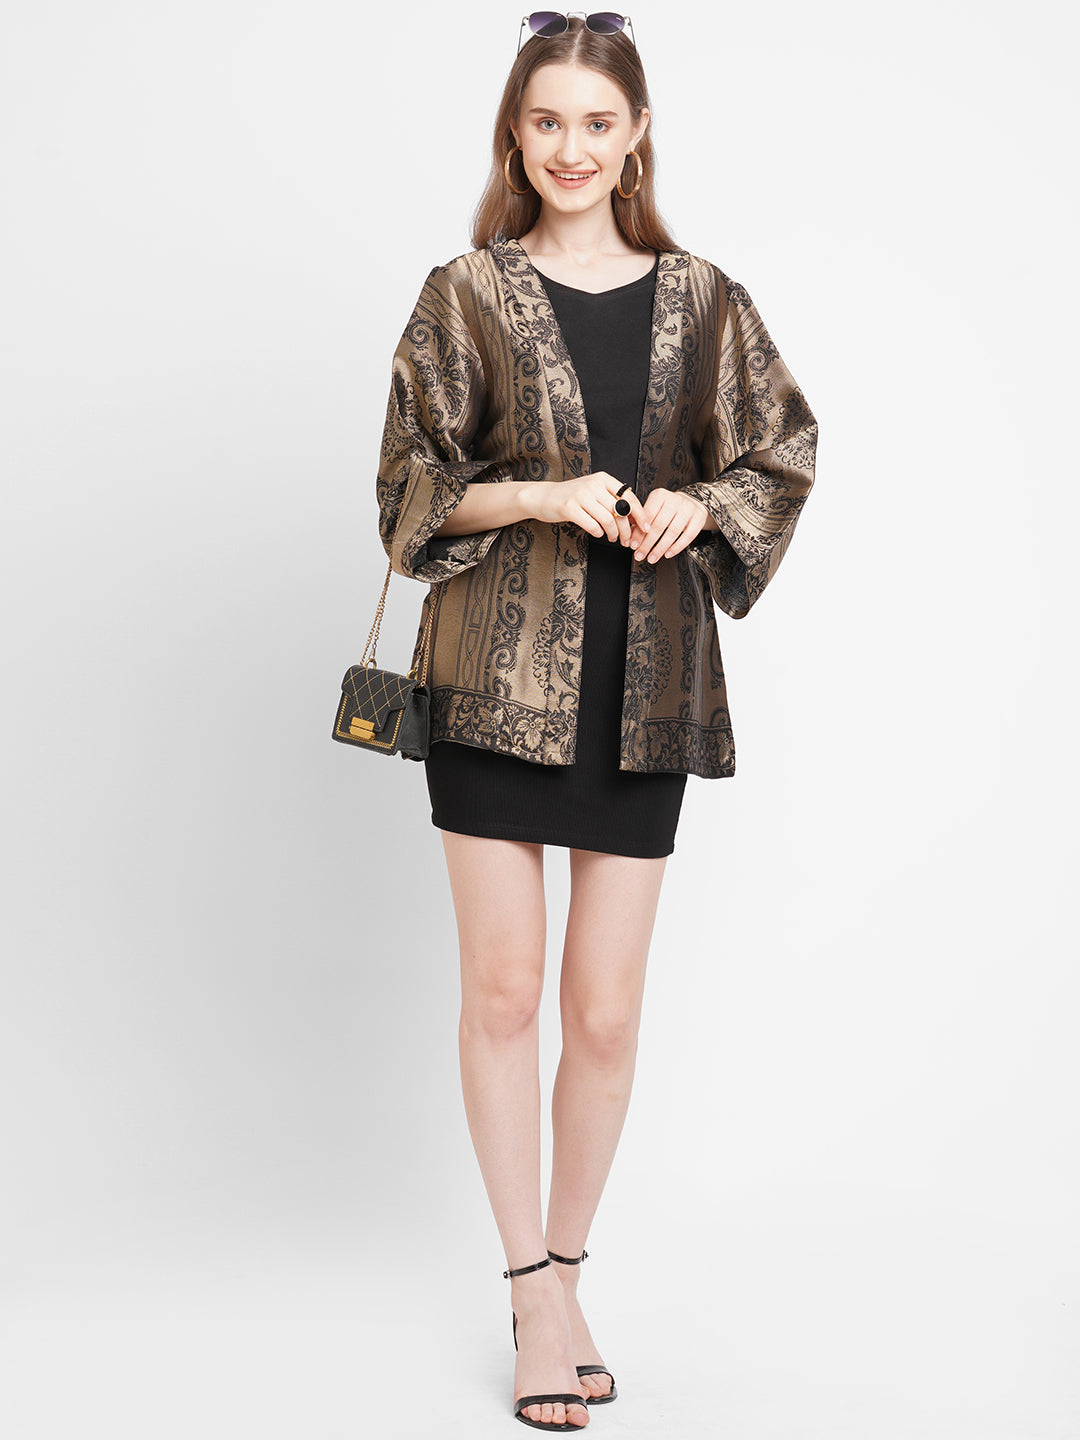 Brocade French Patterned Jacket